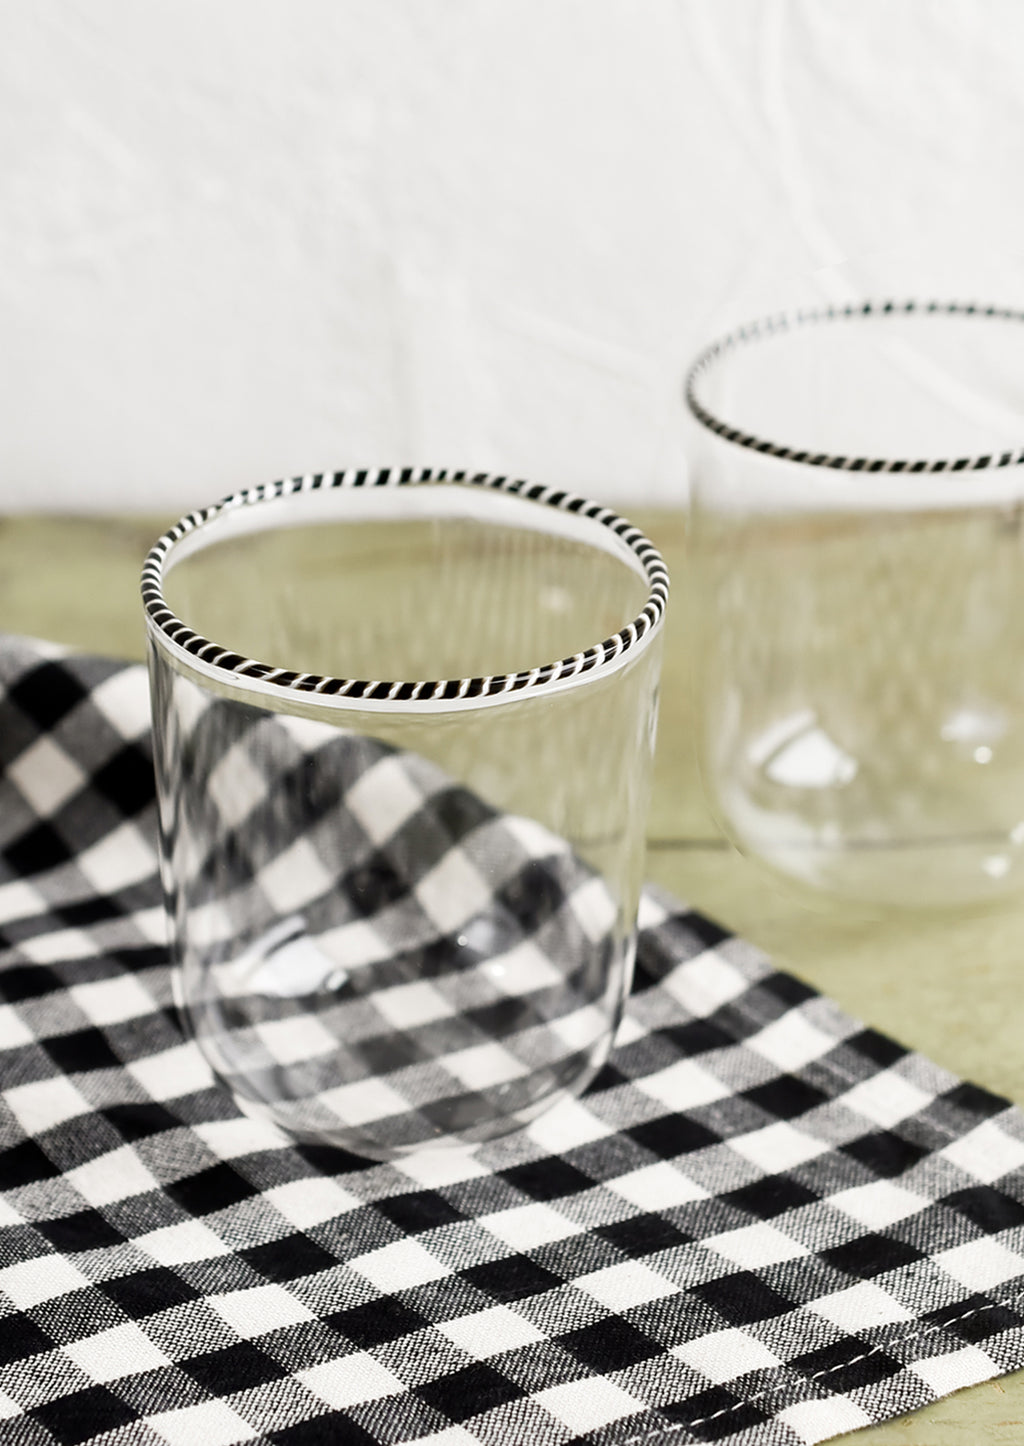 Clear: A pair of clear glass tumblers with black and white striped rim.